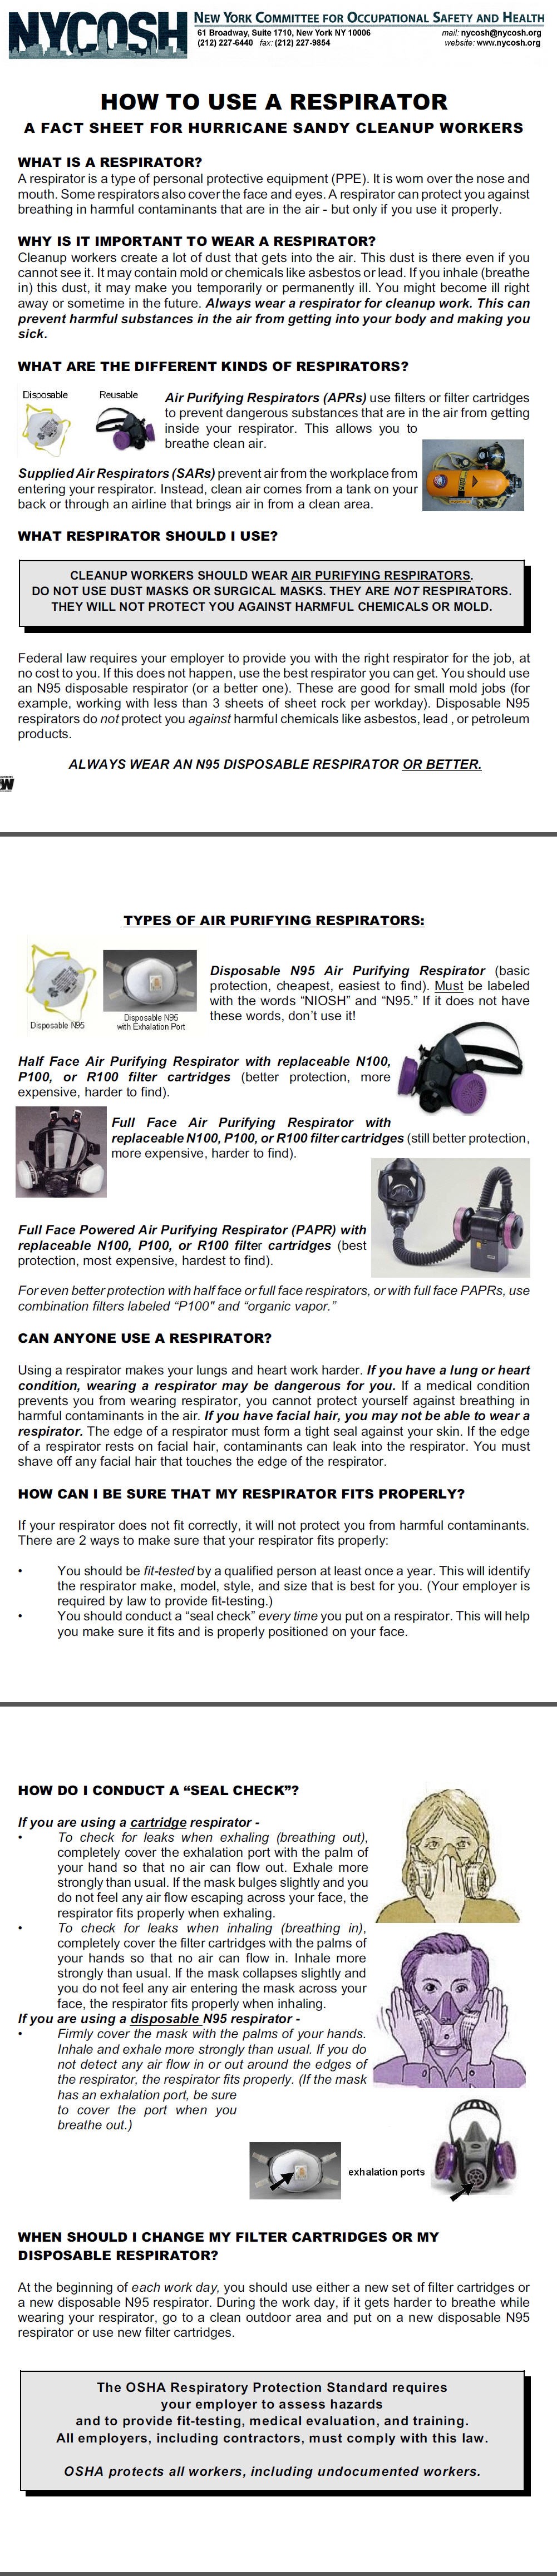 How To Use A Respirator!